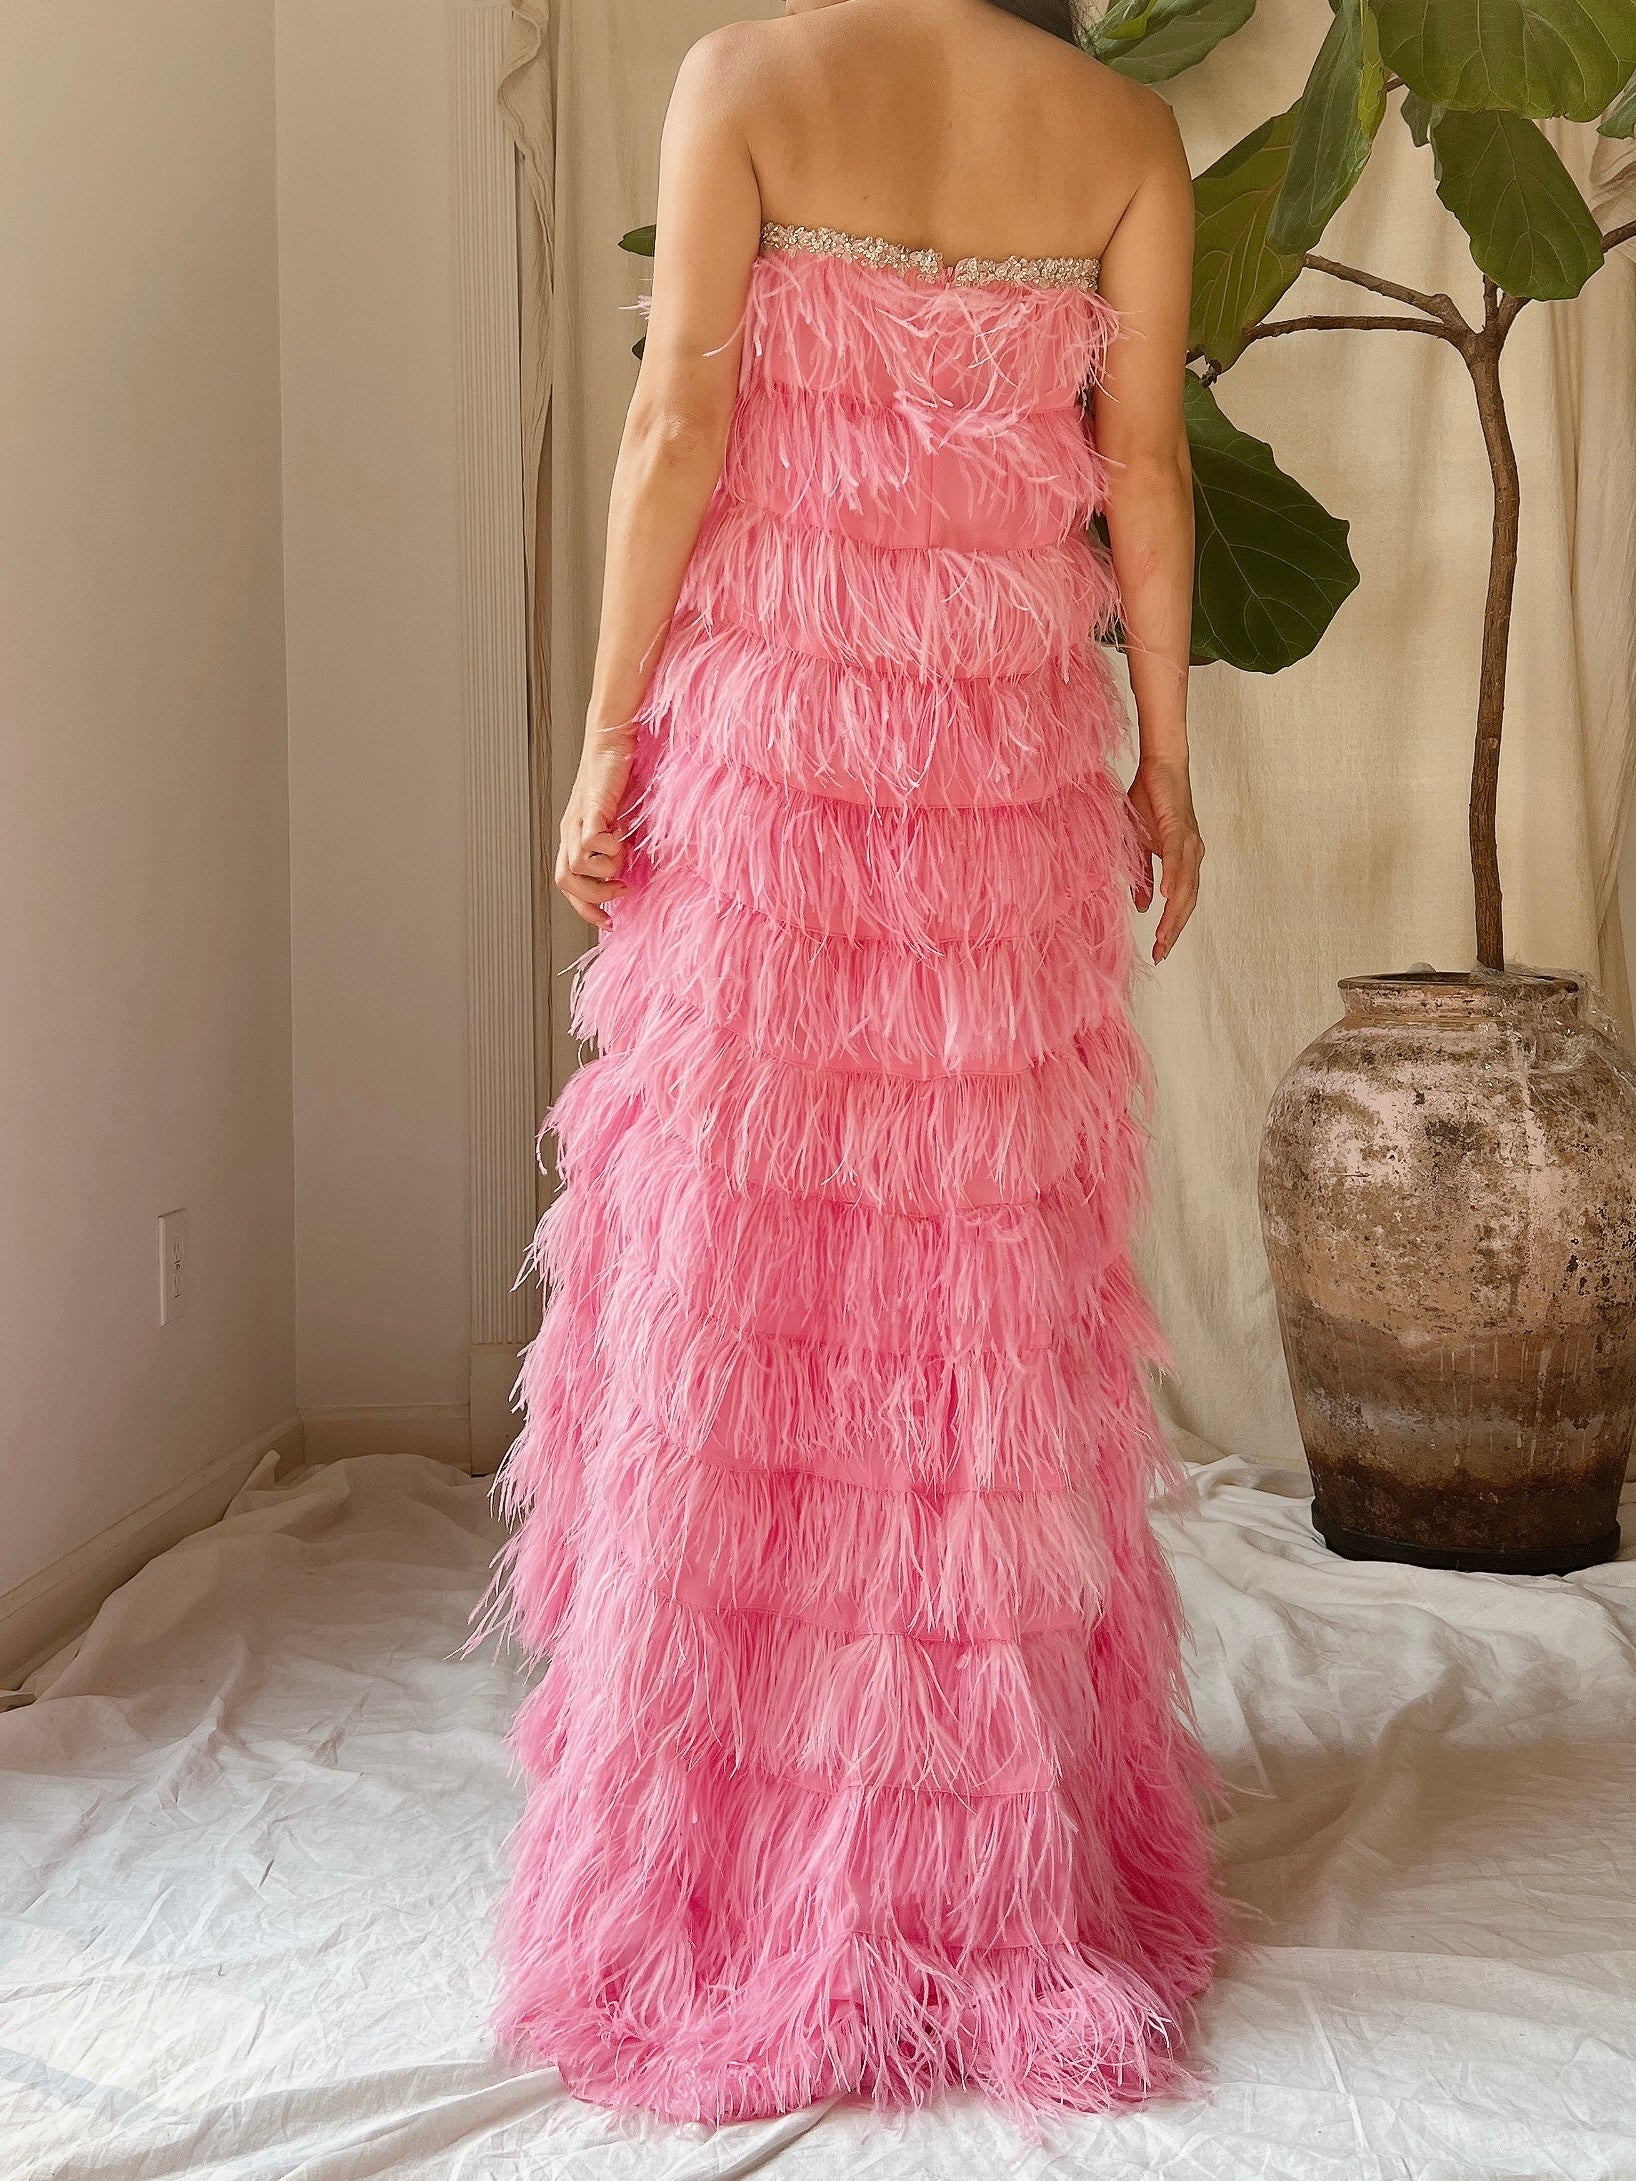 Pink Feather Tiered Dress - S-L